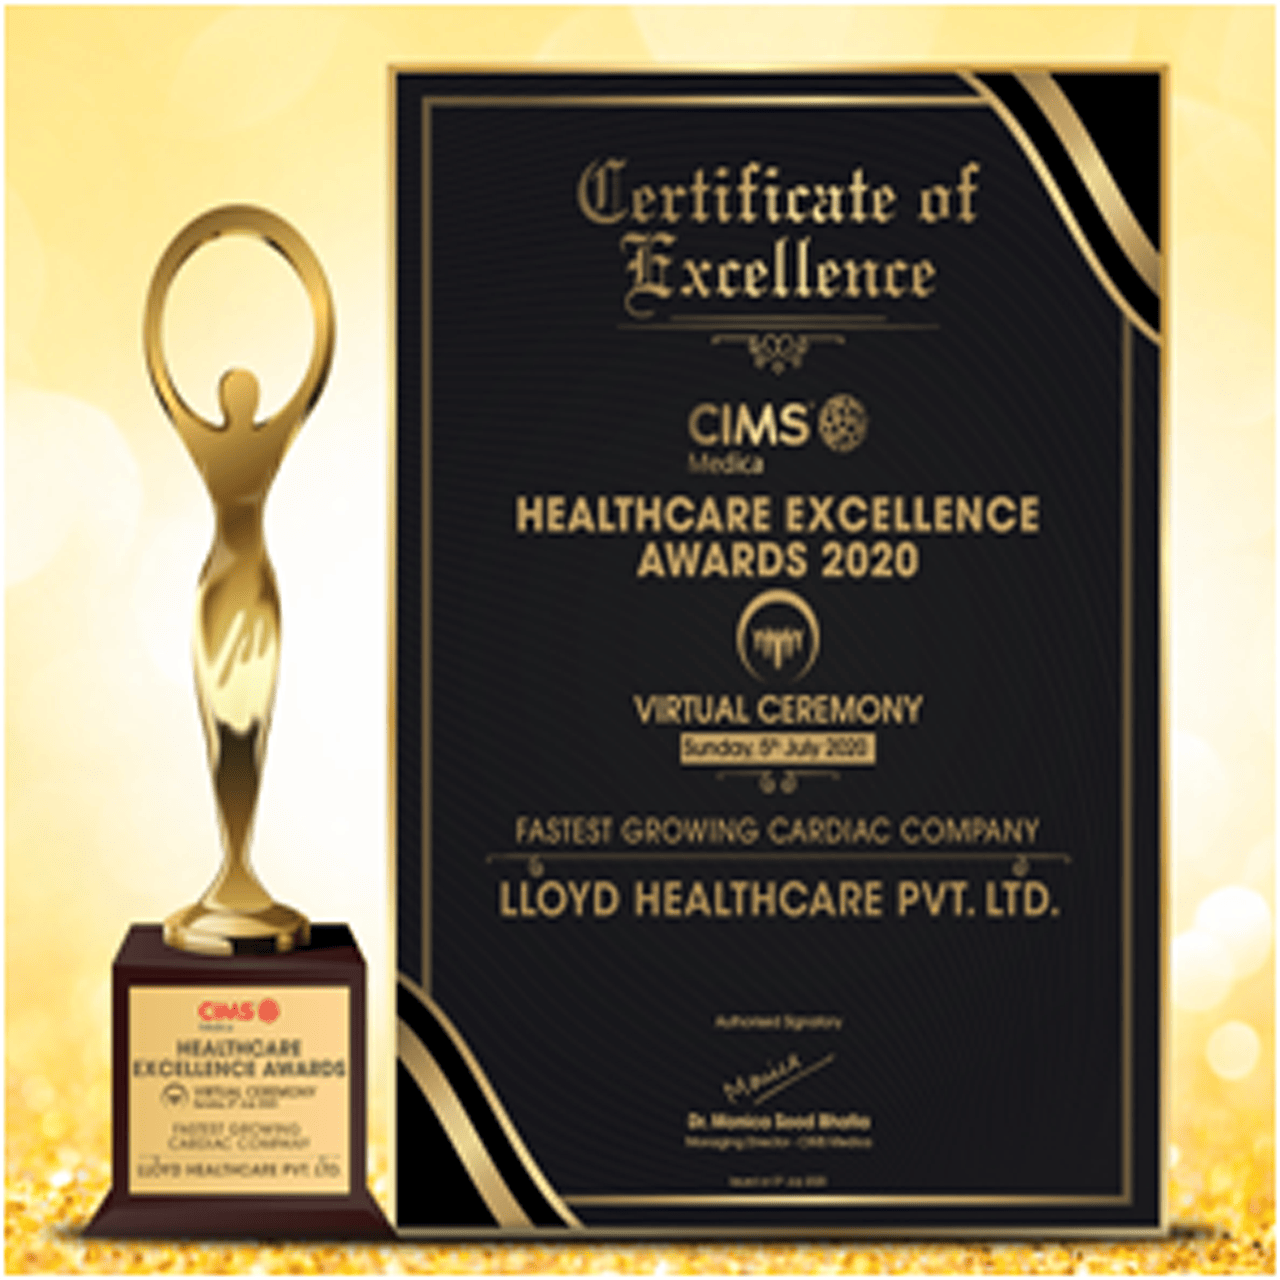 Lloyd Healthcare has been awarded From CIMS Medica Healthcare Excellence Award 2020